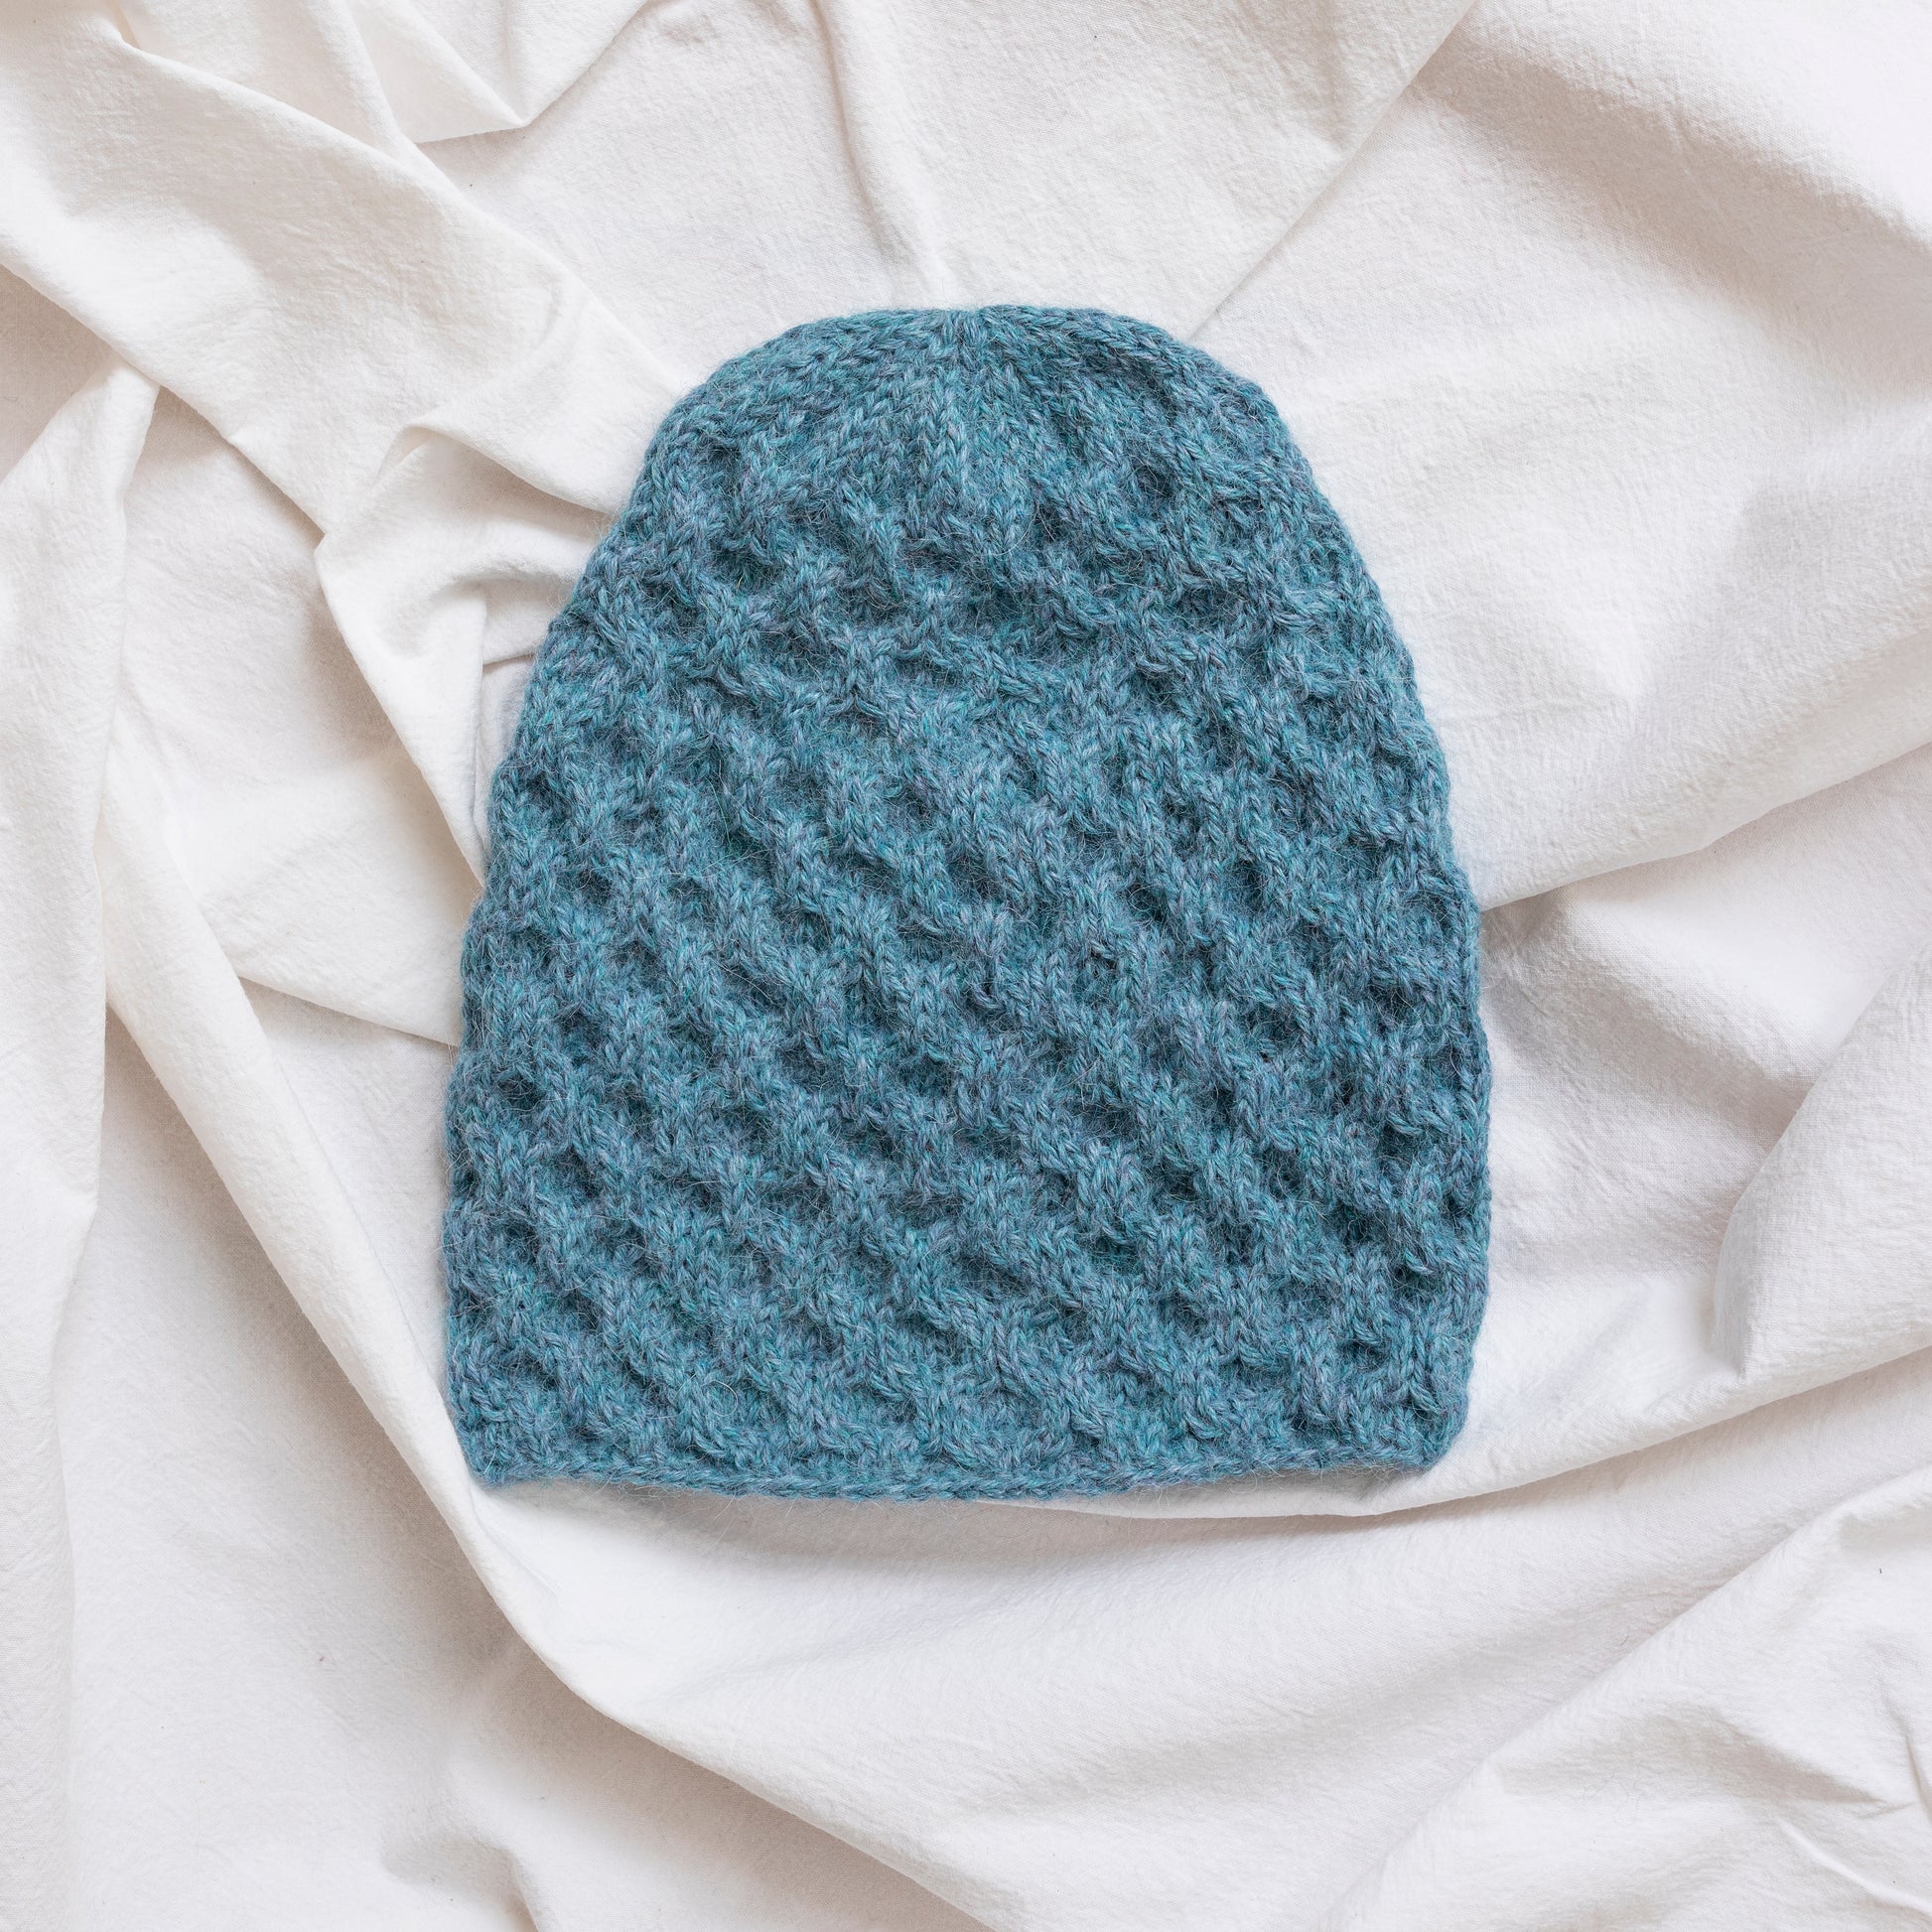 Textured hand-knitted sky blue coloured beanie hat. 